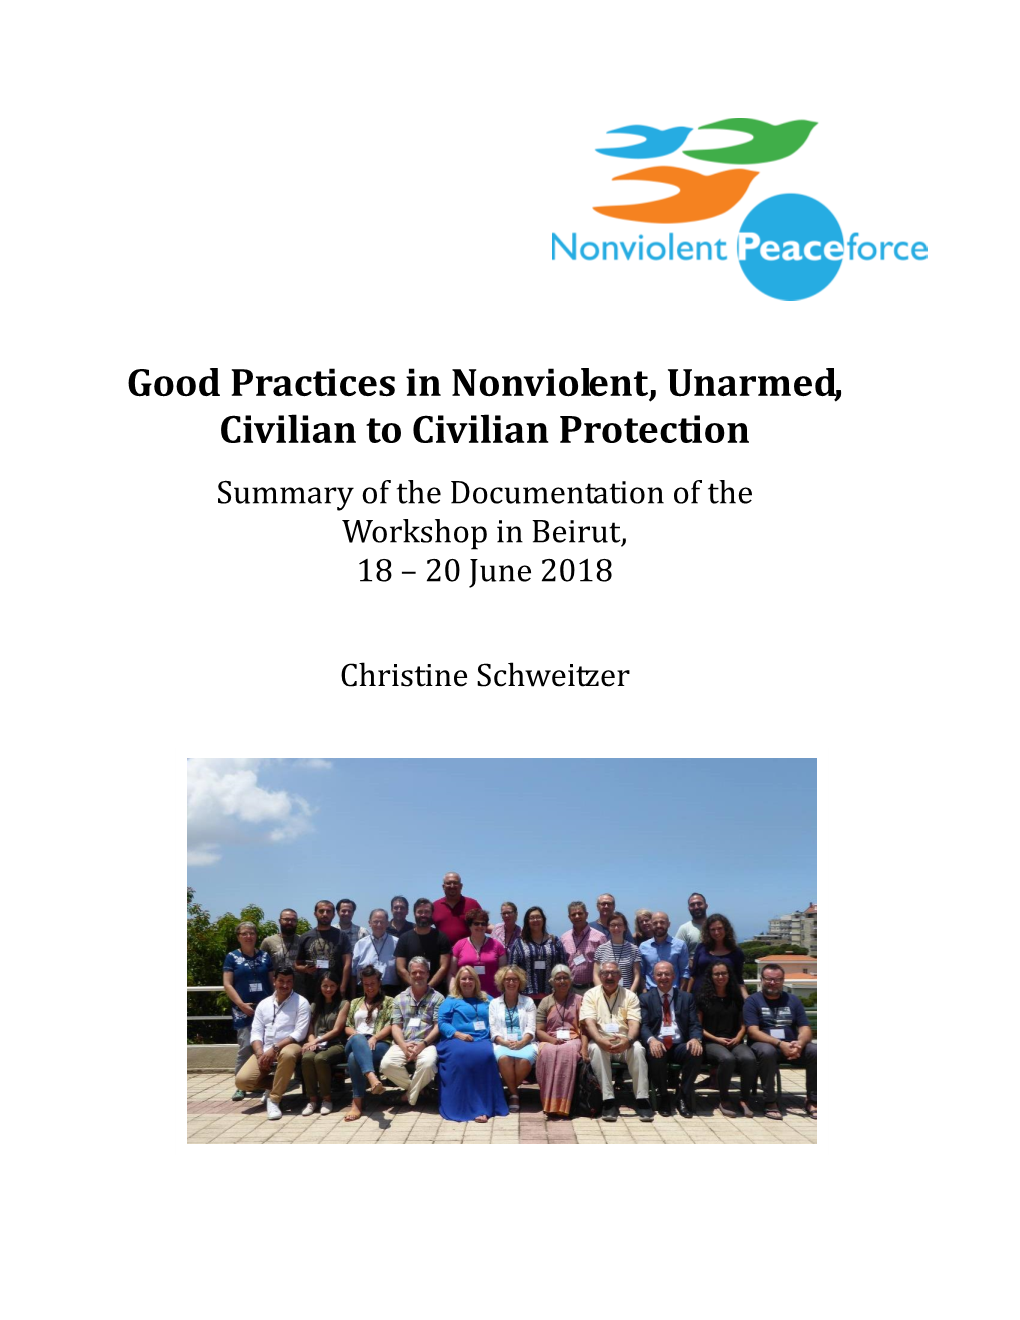 Good Practices in Nonviolent, Unarmed, Civilian to Civilian Protection Summary of the Documentation of the Workshop in Beirut, 18 – 20 June 2018